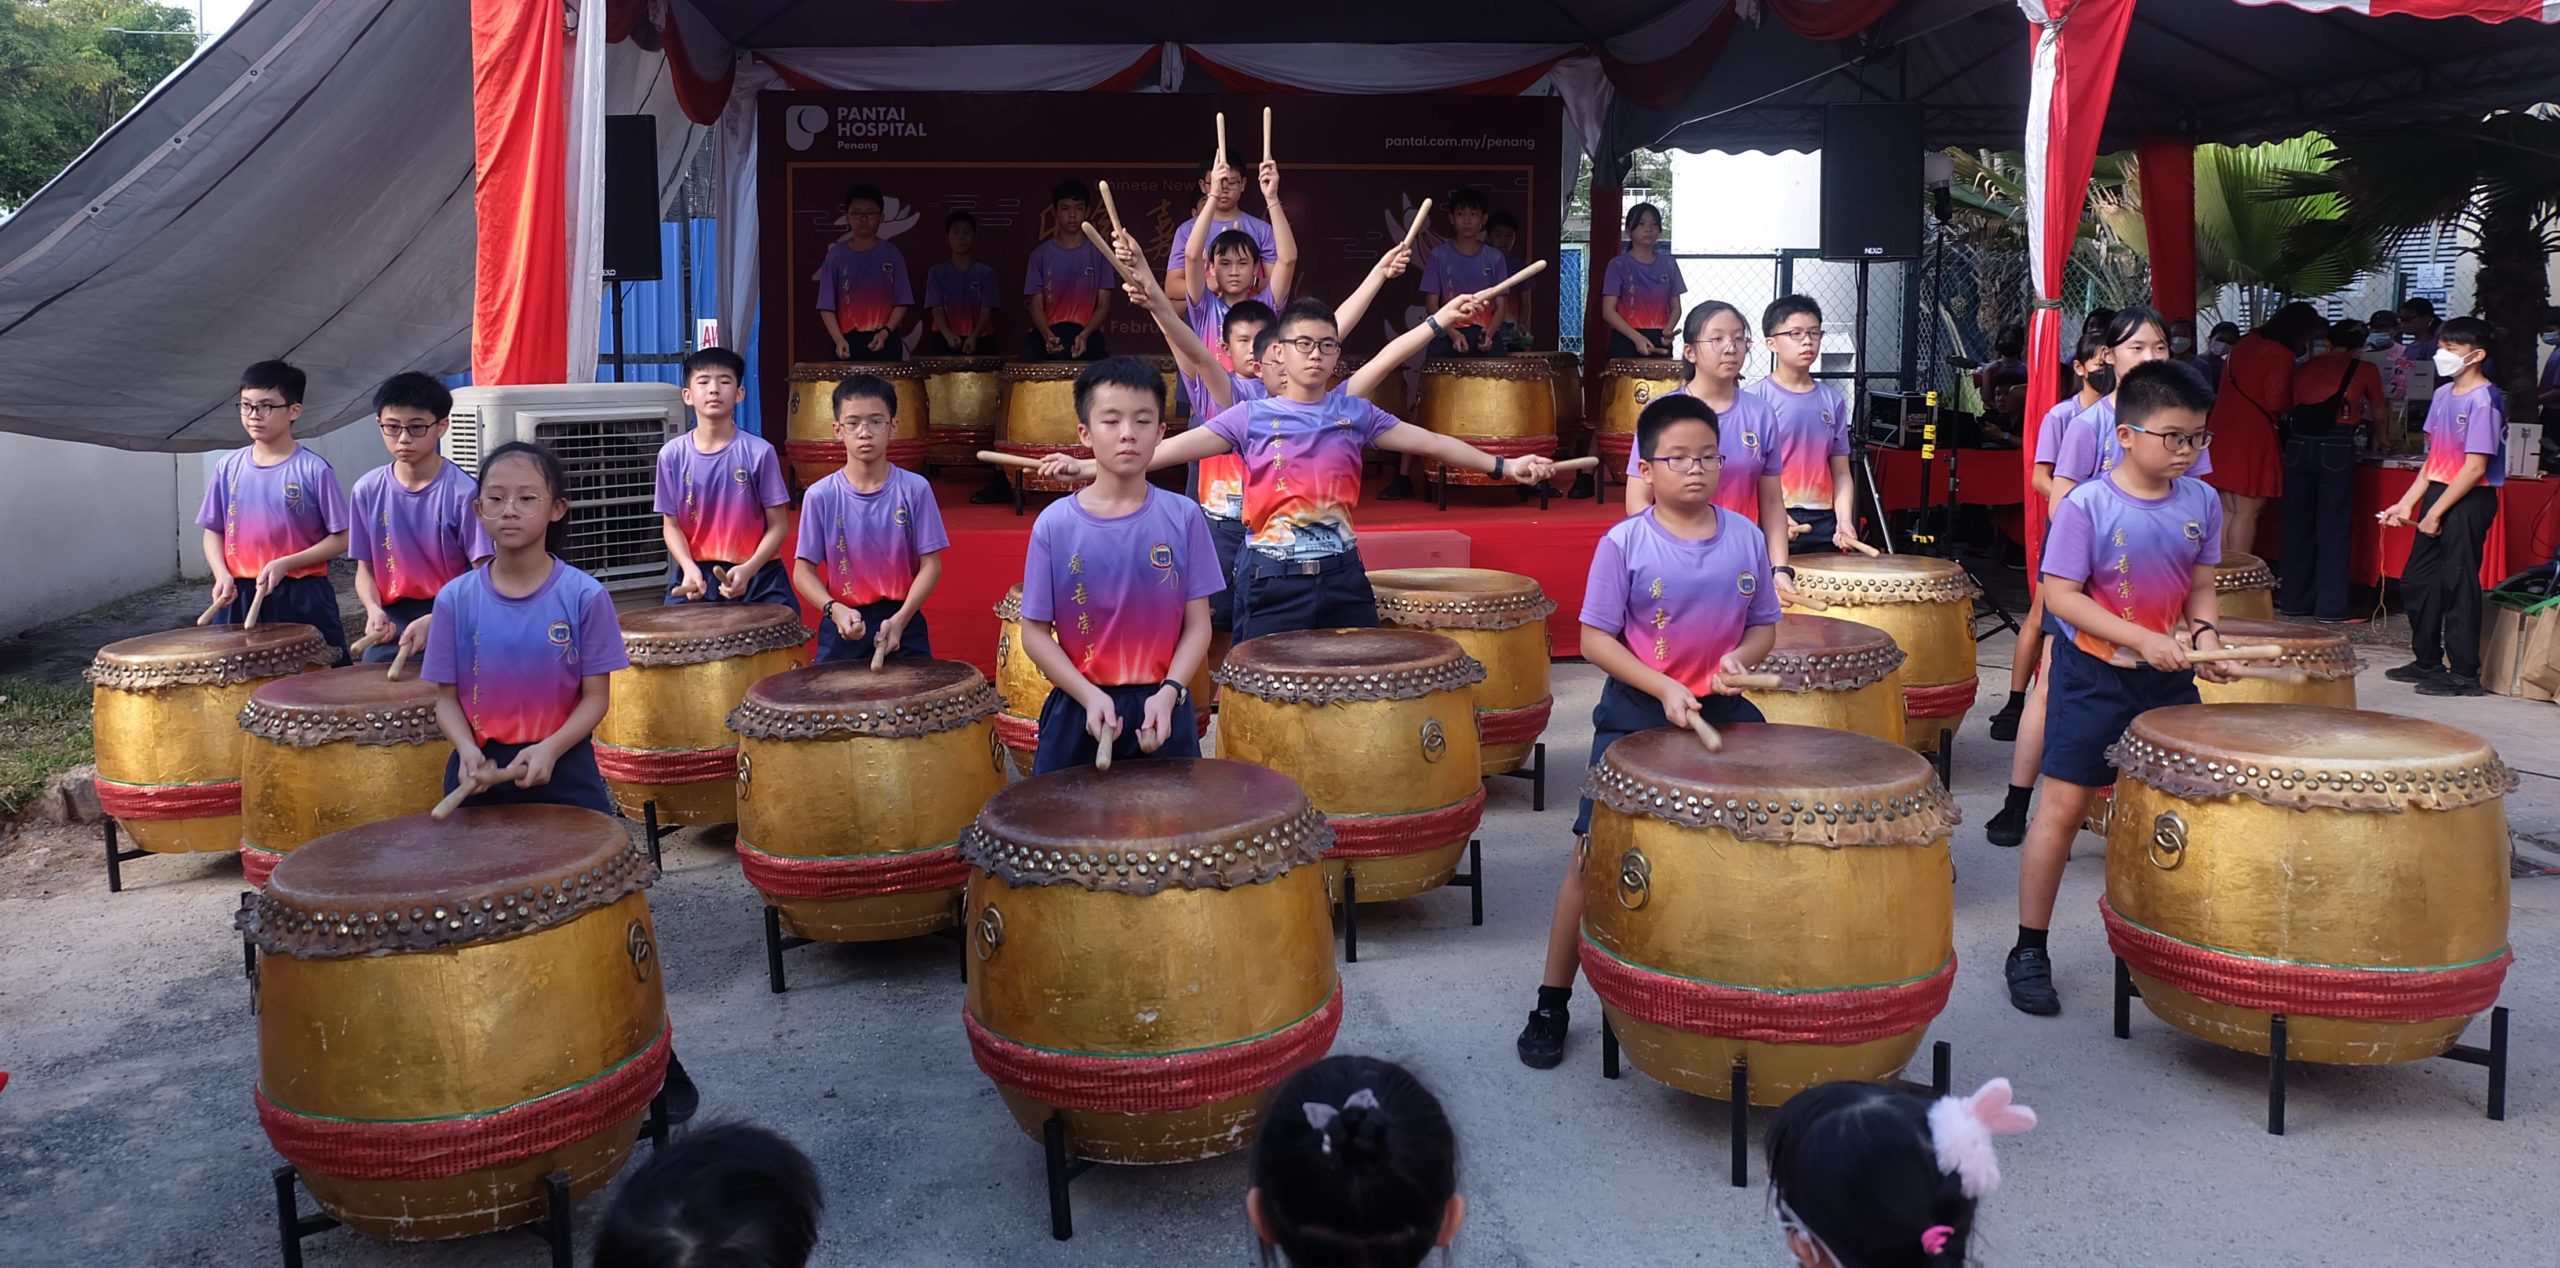 The twenty-four seasonal drums presented by Xingang Chongzheng Primary School are magnificent.